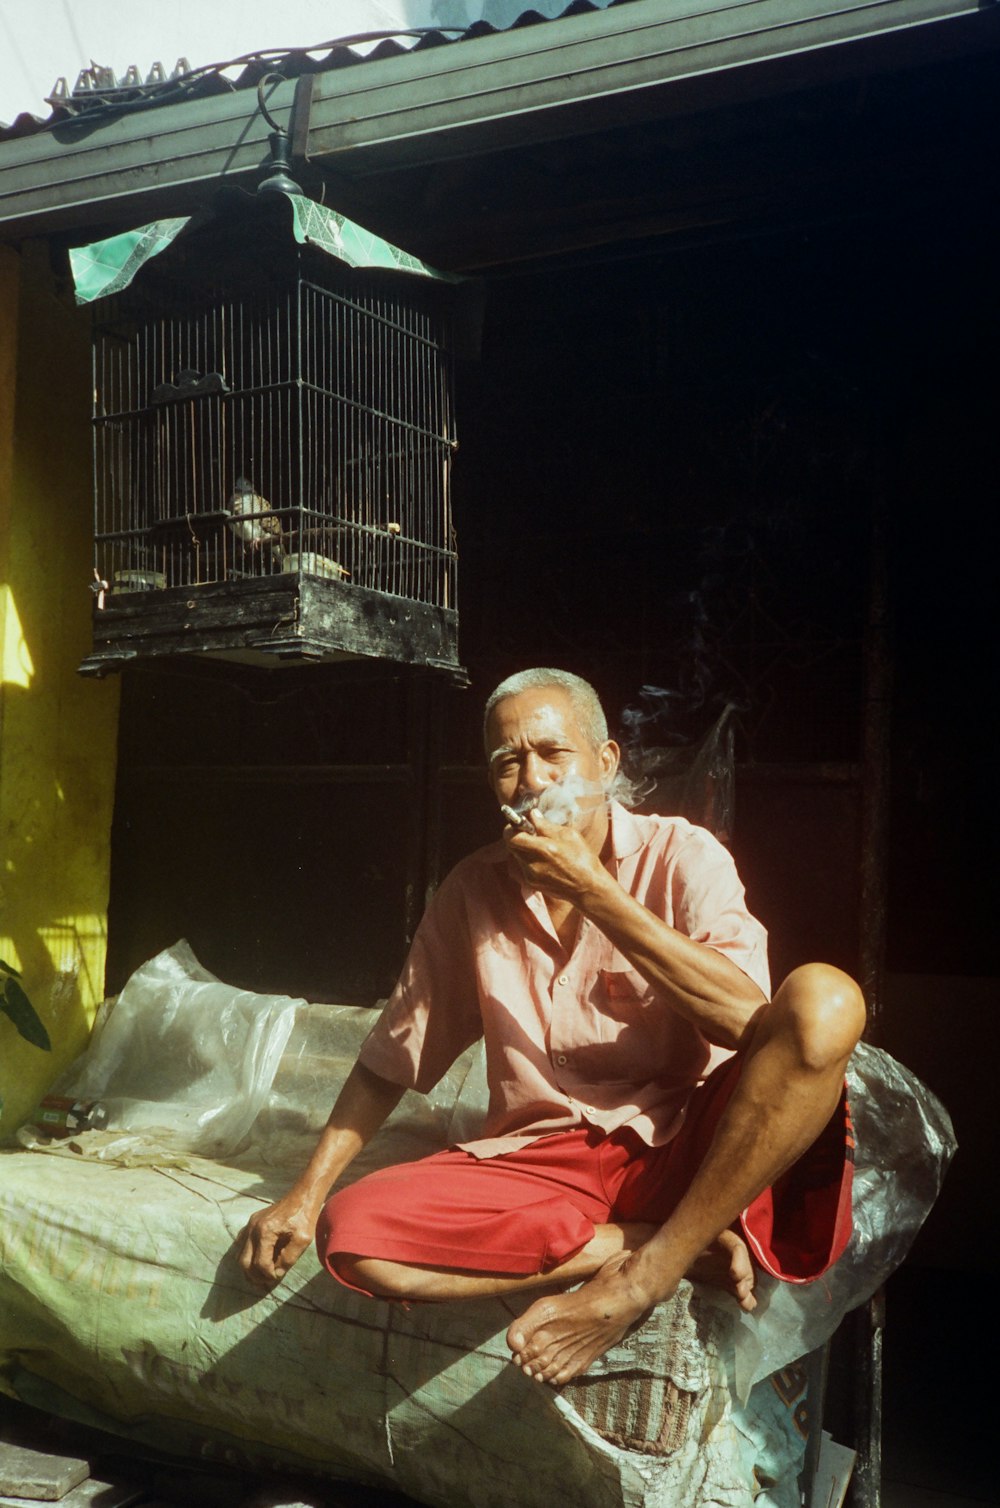 a man sitting on top of a bed next to a bird cage